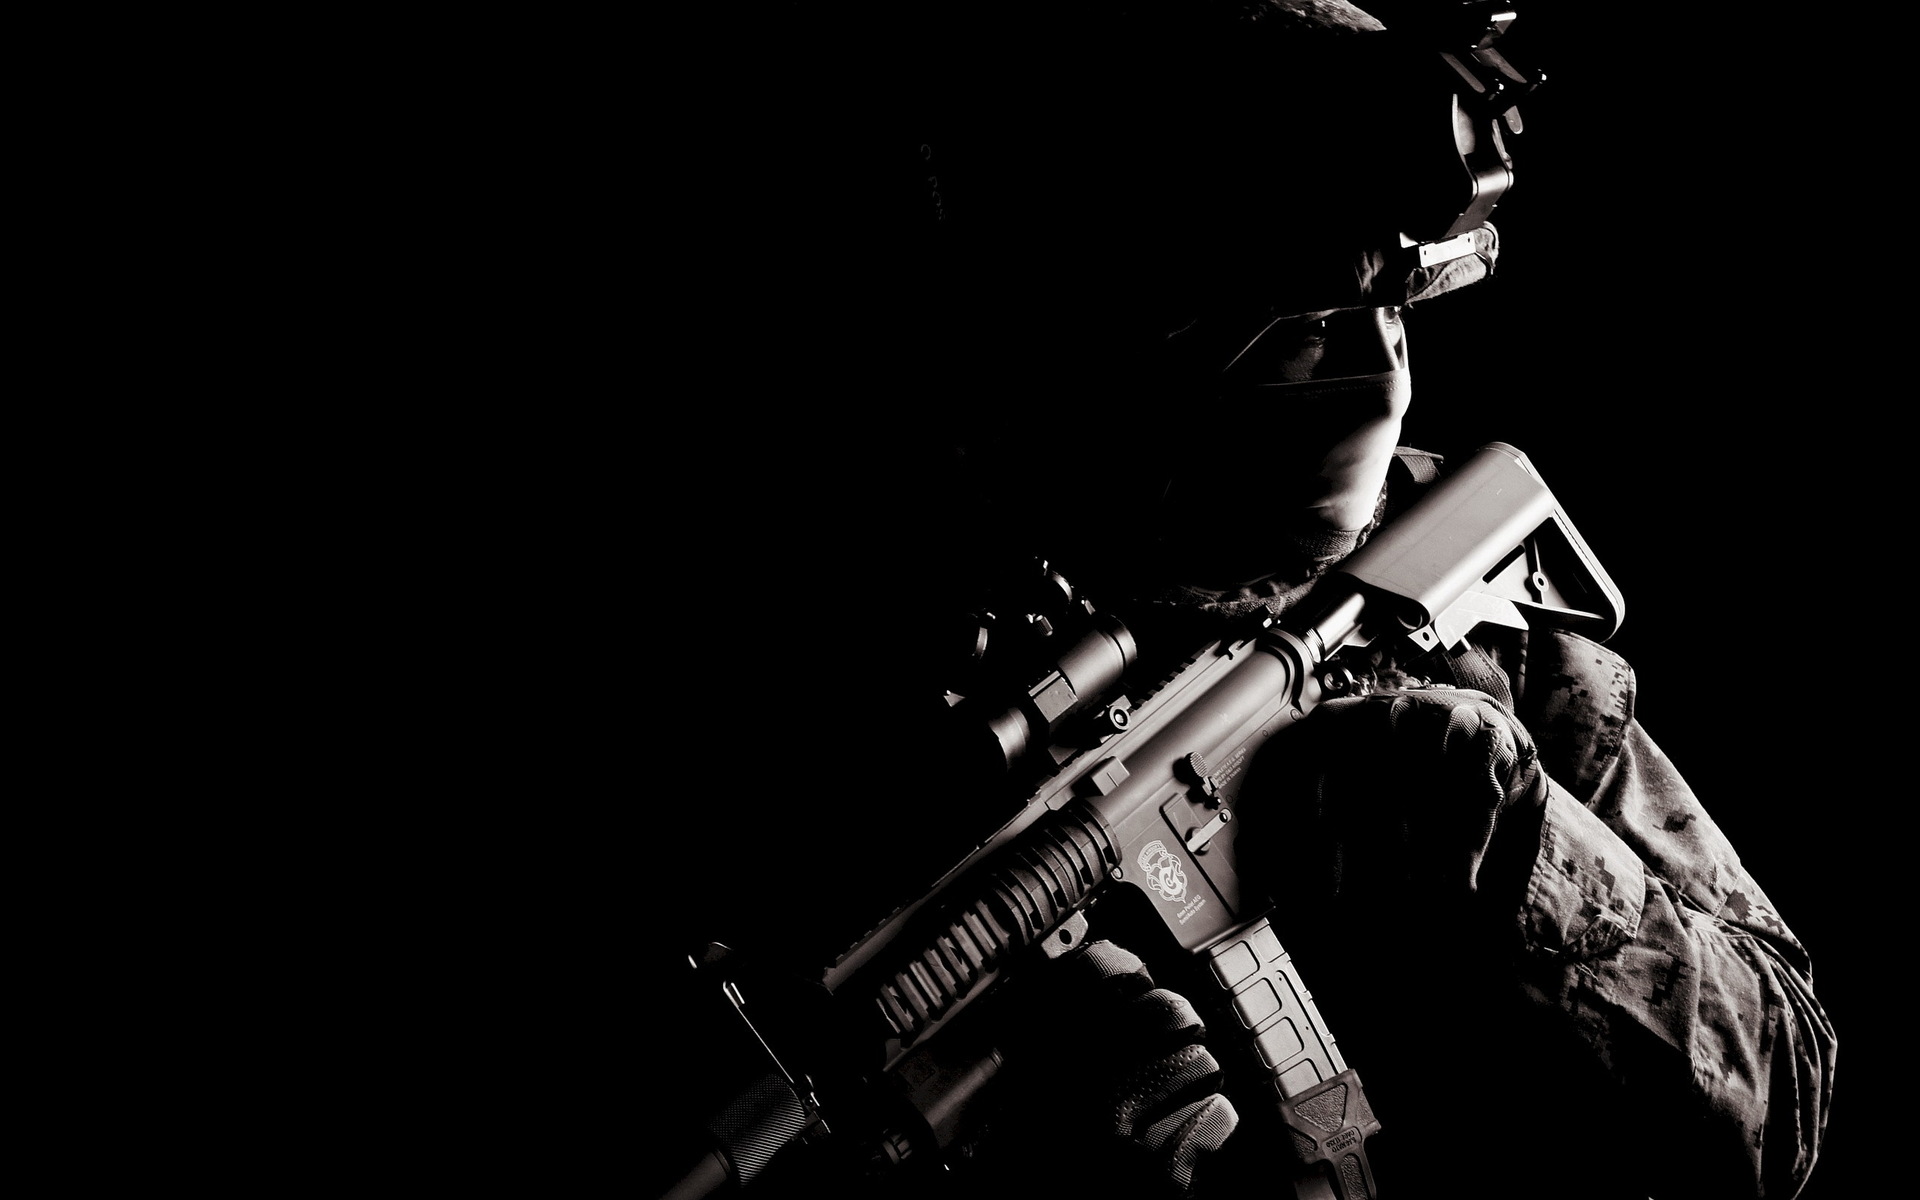 Download the following Navy Seal Wallpaper 11860 by clicking the